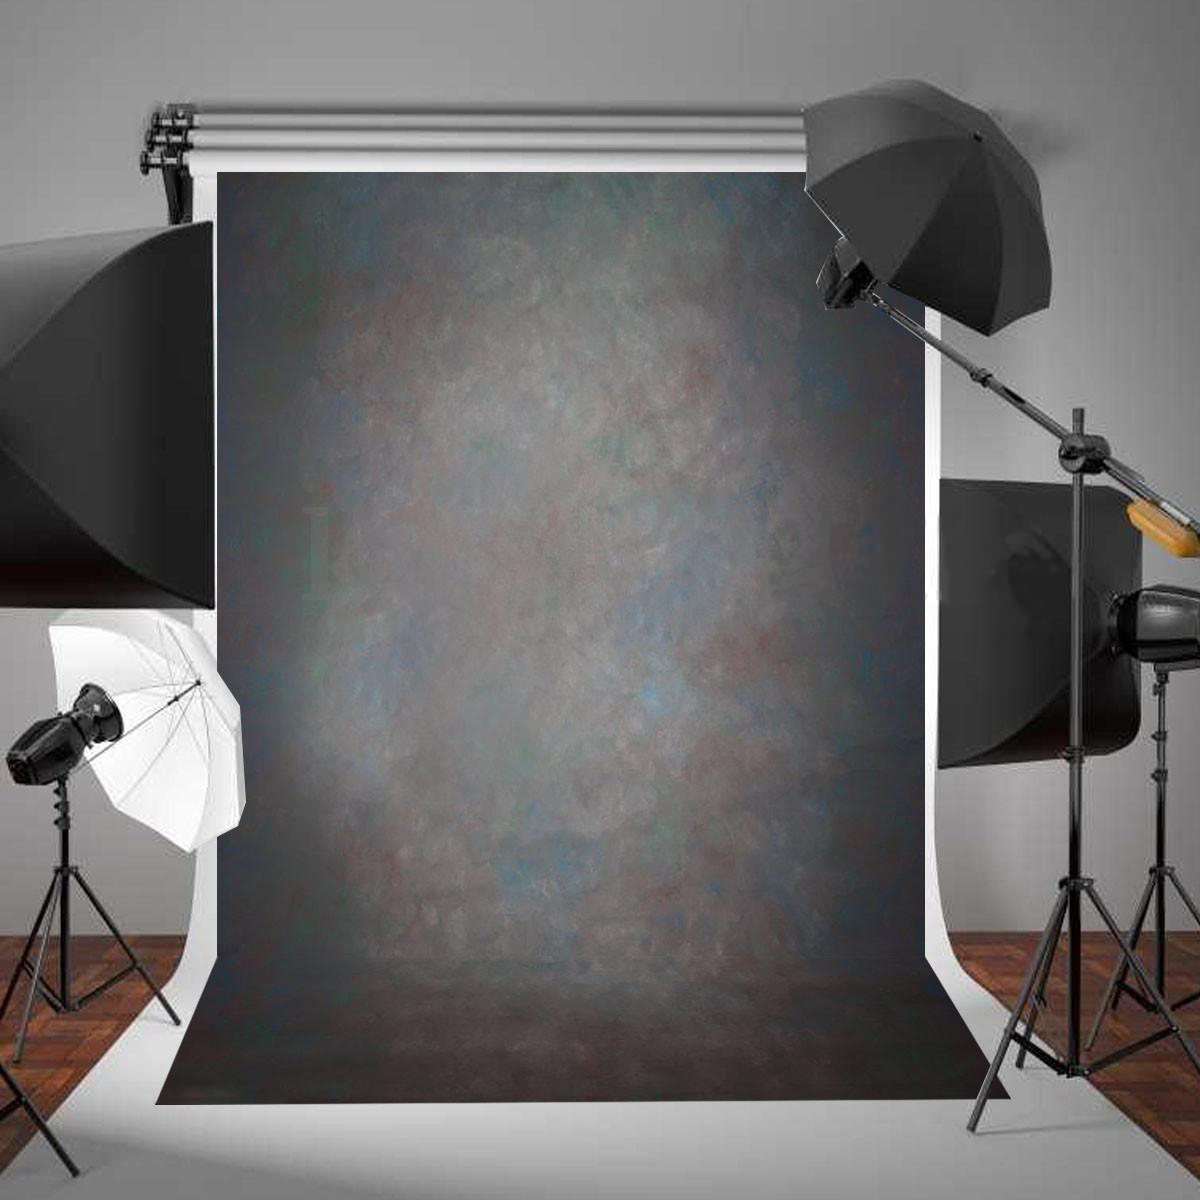 YouLoveIt Studio Photo Video Photography Backdrops 5x7ft Studio Photo Video Background Screen Props Camera & Photo Studio Props, 20+ colors - image 1 of 4